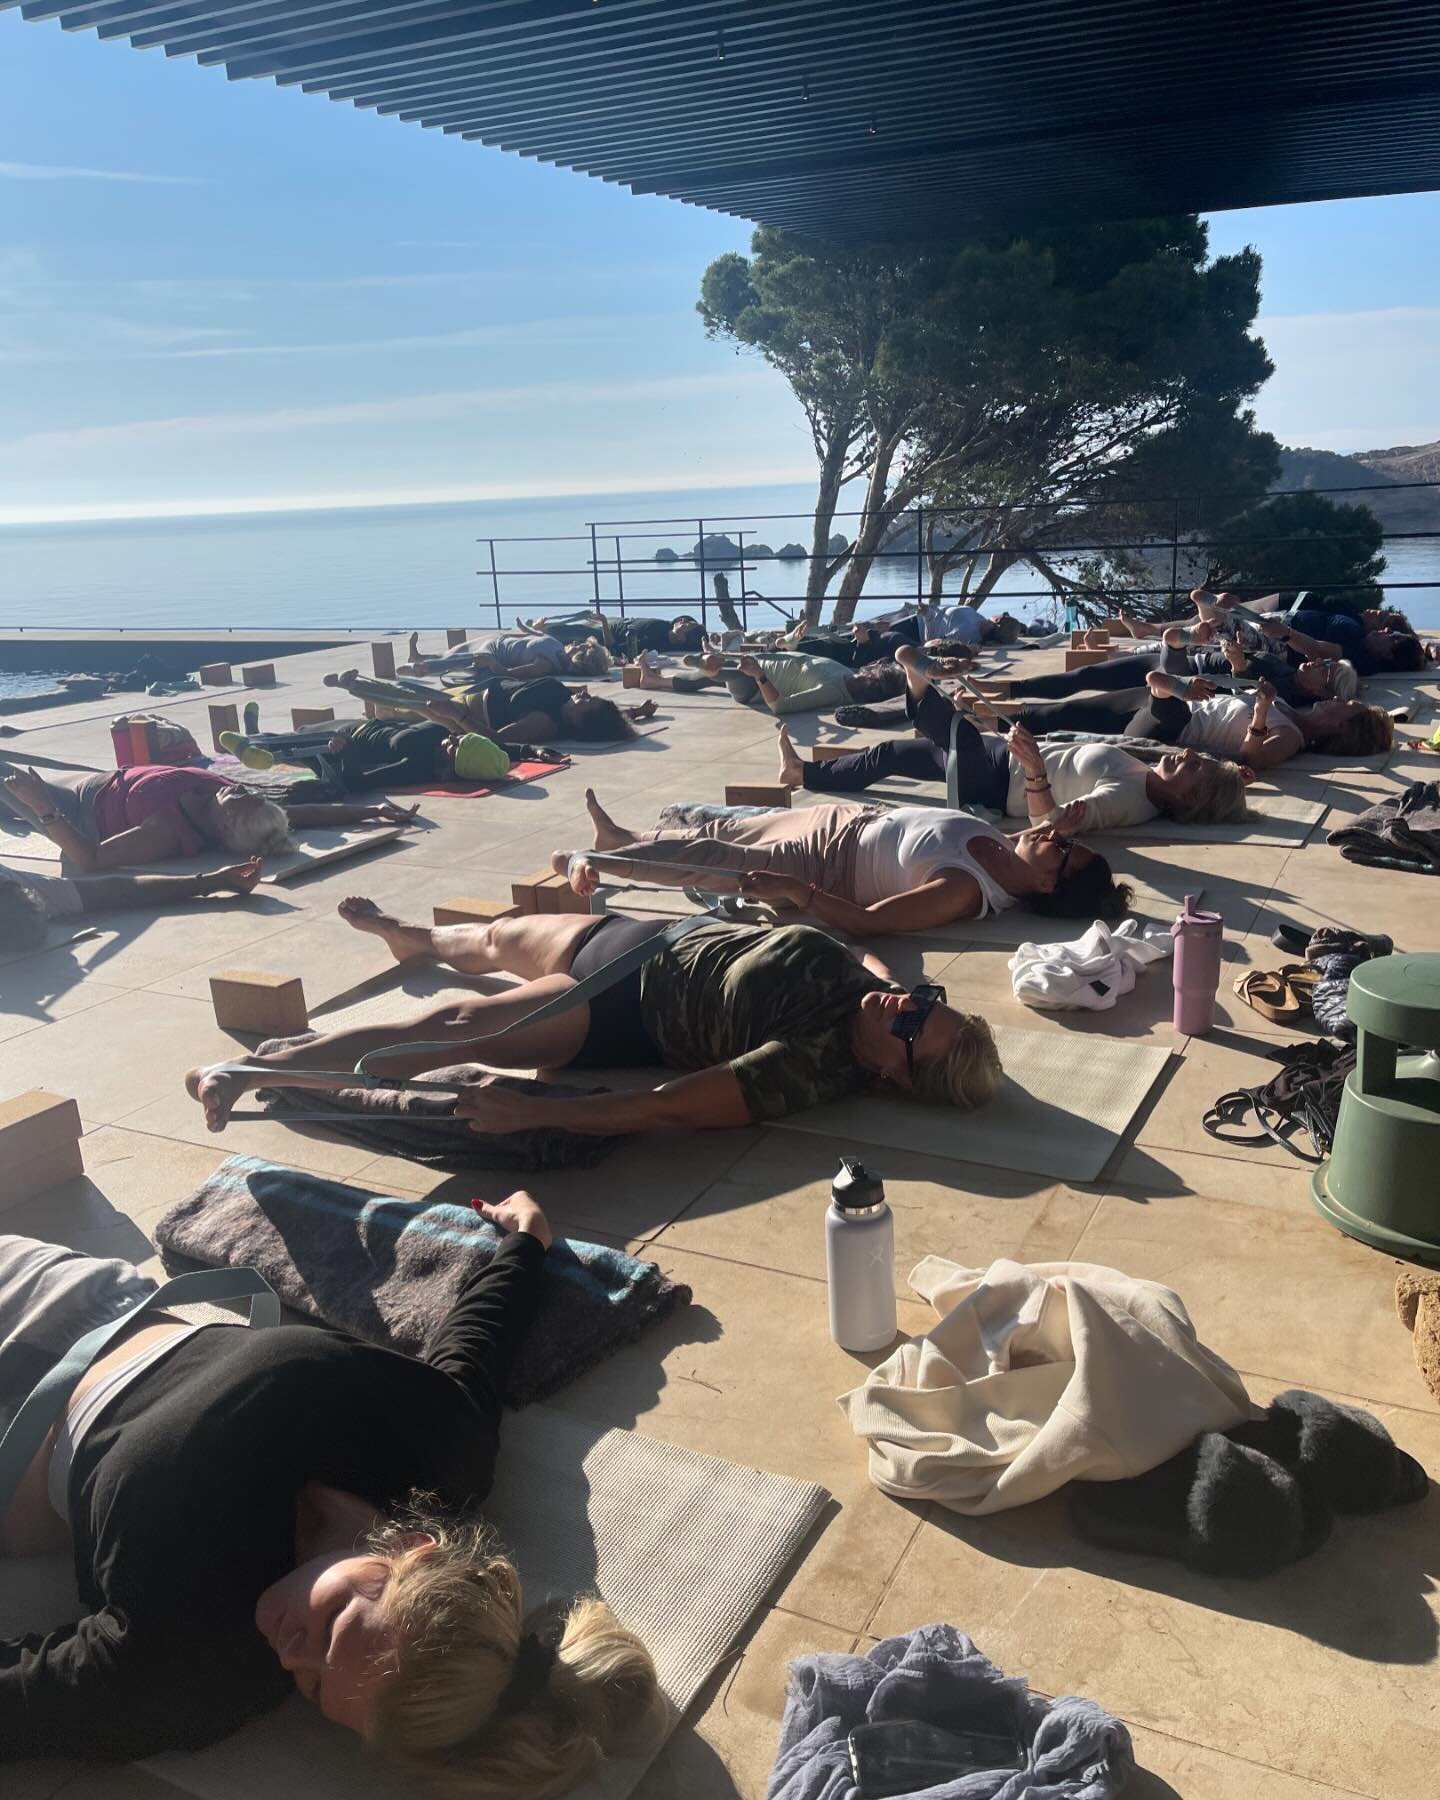 Orleans Yoga in Costa Brava🇪🇸🩵
Gorgeous beach day between beautiful practices by the sea!

With @solseedretreats 

#yogaretreat #costabravaspain #orleansyoga #orleansyogaretreats